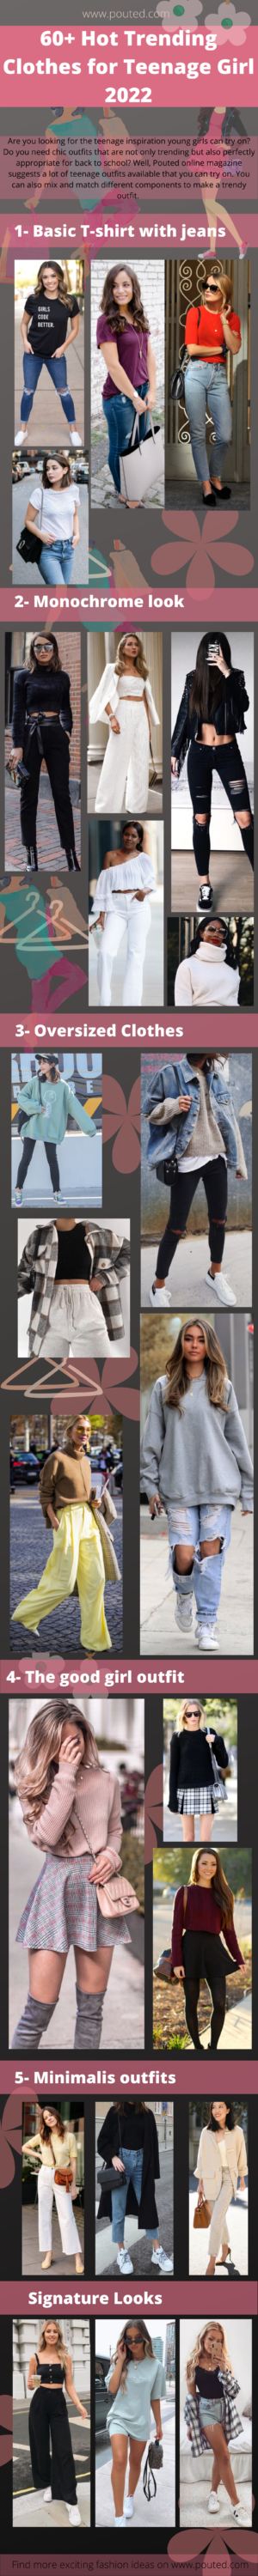 60+ Hot Trending Clothes for Teenage Girl 